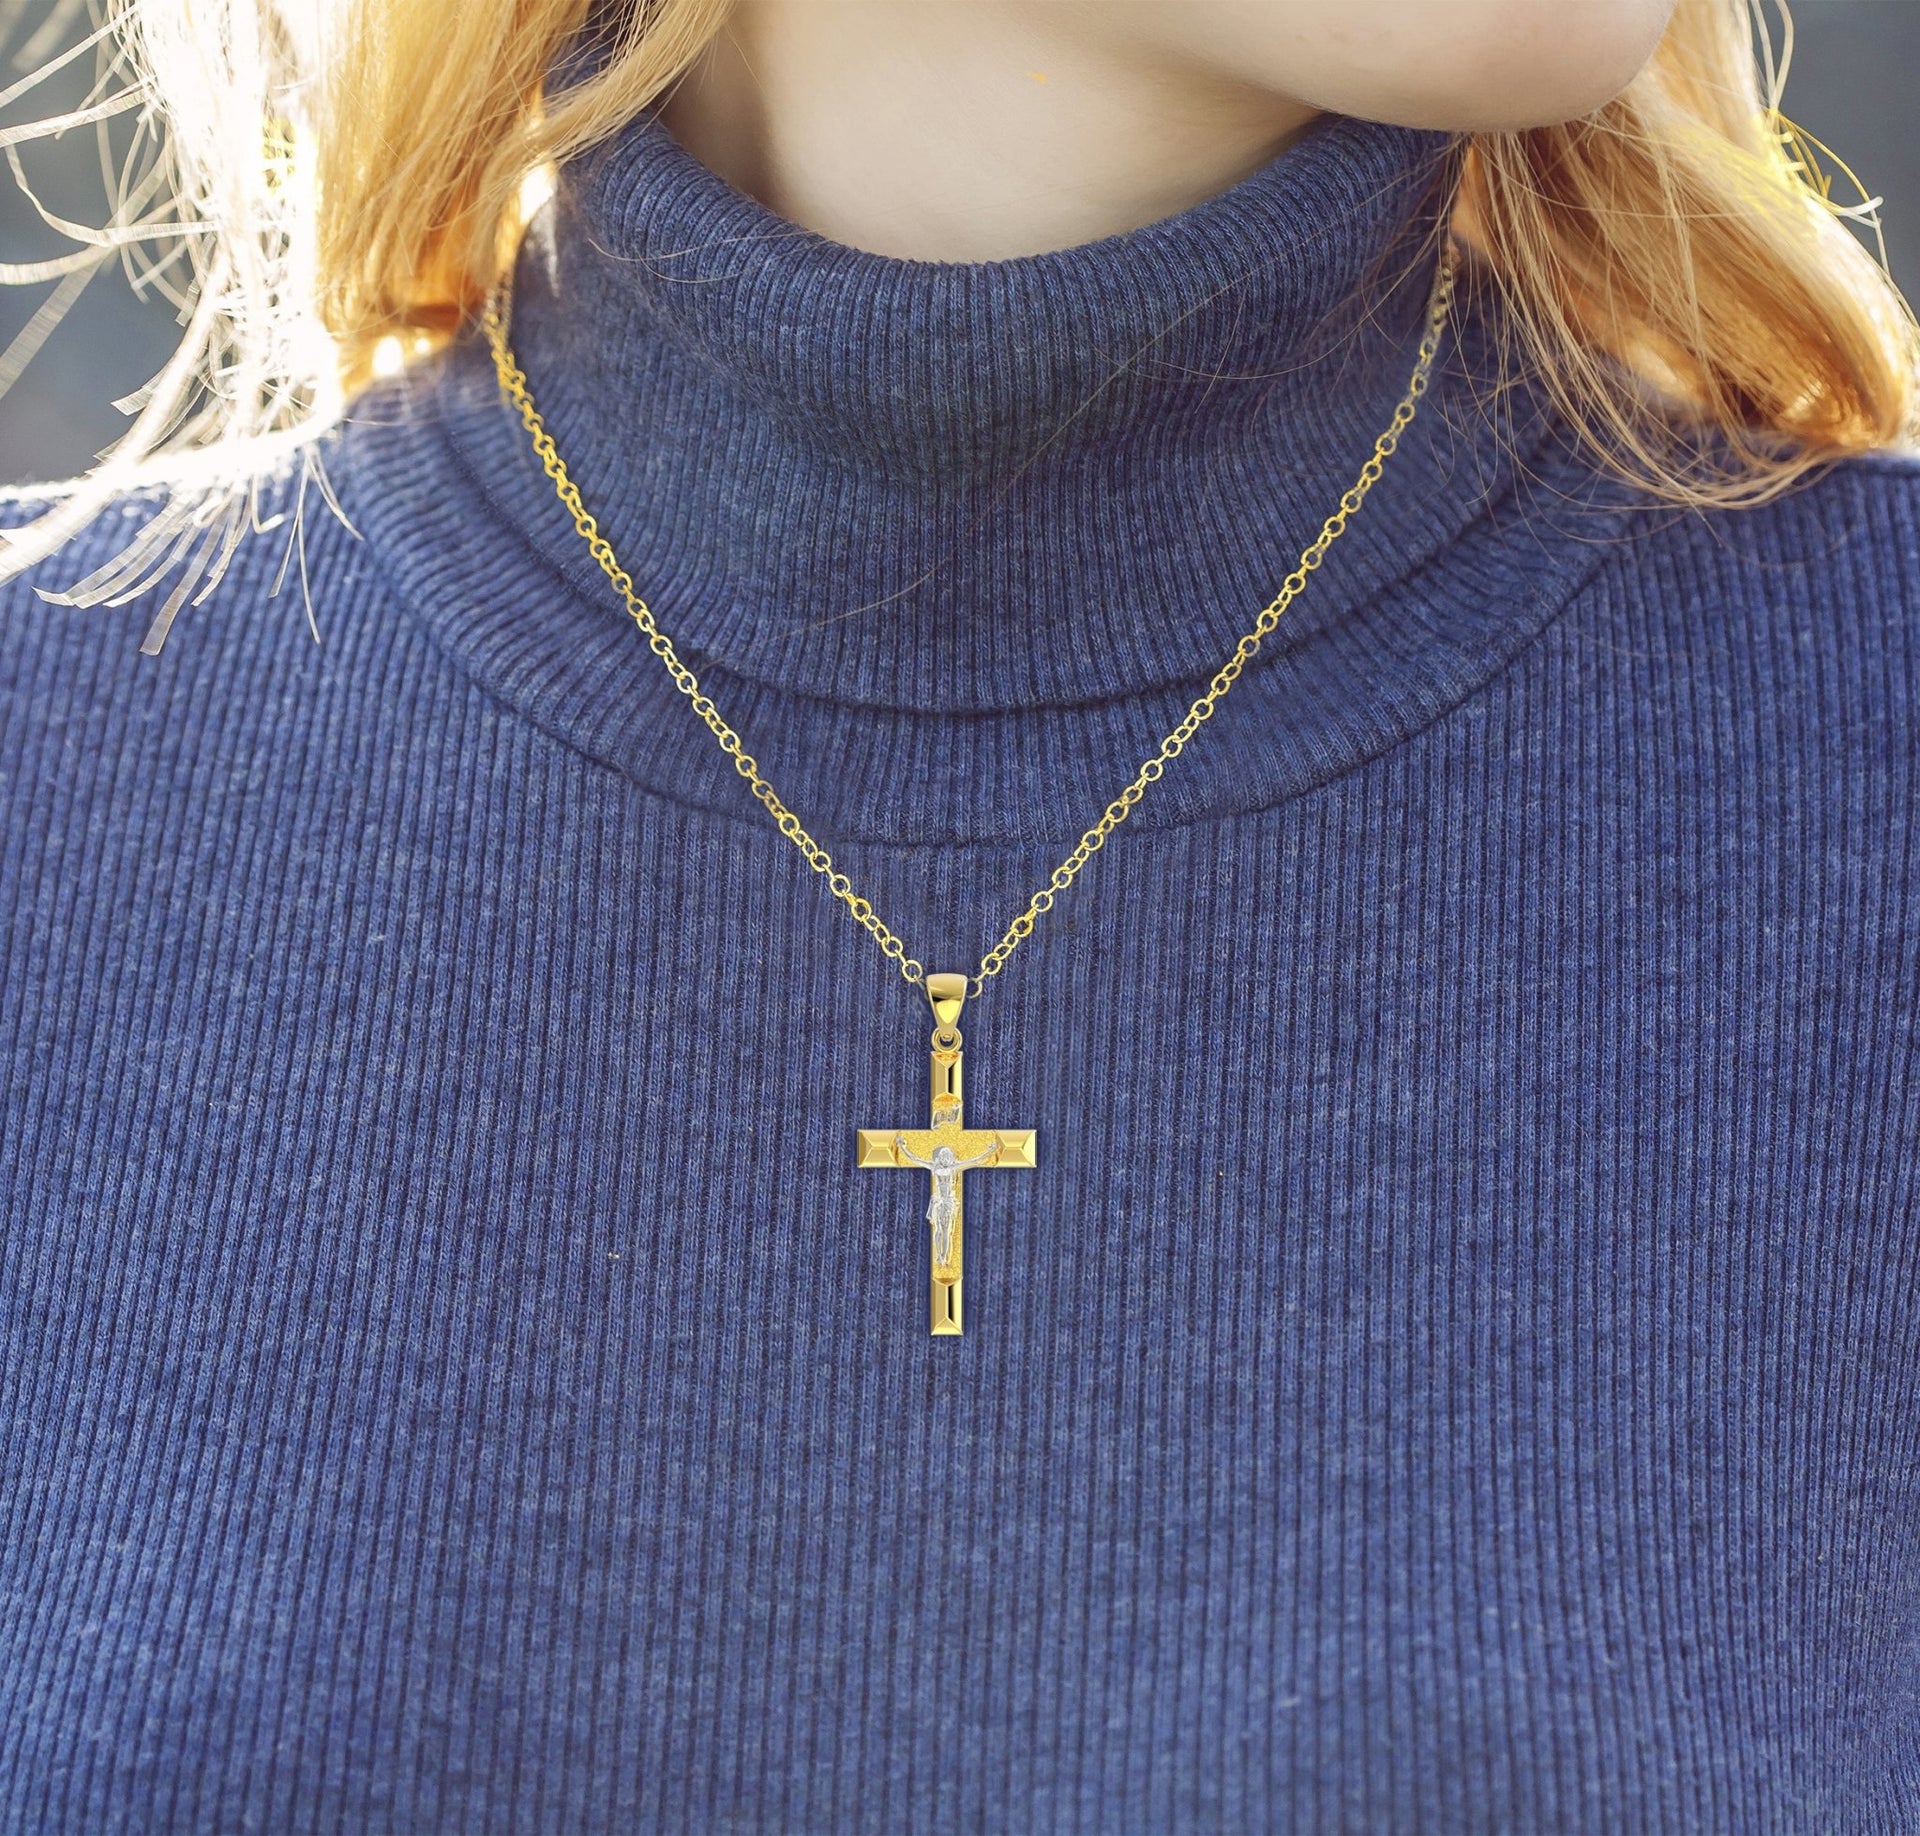 Ladies 14k Yellow Gold Angled Cross Crucifix Pendant Necklace, 32mm - US Jewels